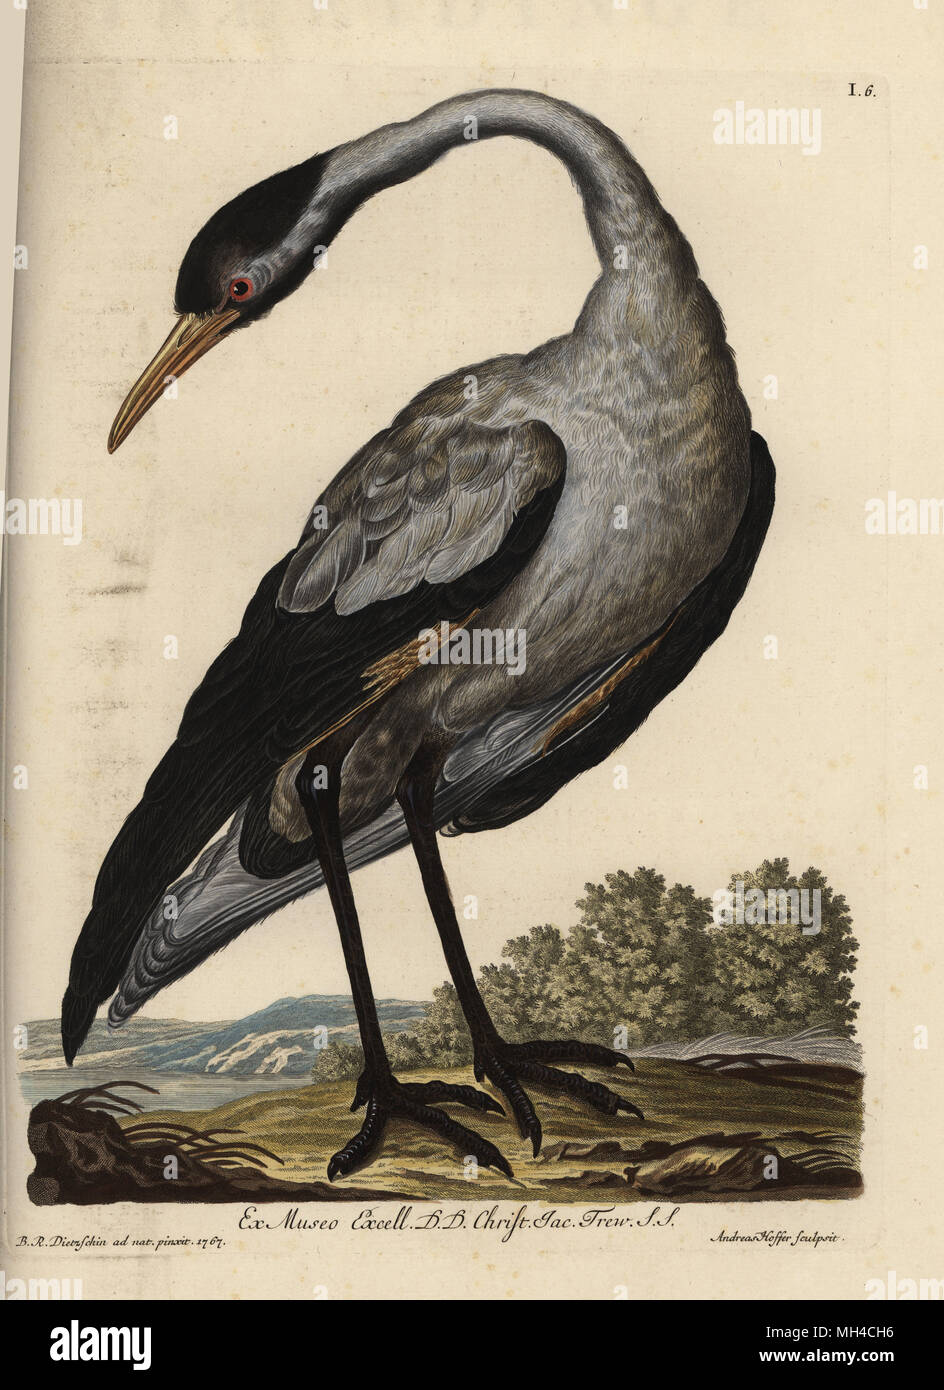 Common crane, Grus grus (Grus nostra). Handcoloured copperplate engraving by Andreas Hoffer after an illustration by Barbara Regina Dietzsch from Georg Wolfgang Knorr's Deliciae Naturae Selectae of Kabinet van Zeldzaamheden der Natuur, Blusse and Son, Nuremberg, 1771. Specimens from a Wunderkammer or Cabinet of Curiosities owned by Dr. Christoph Jacob Trew in Nuremberg. Stock Photo